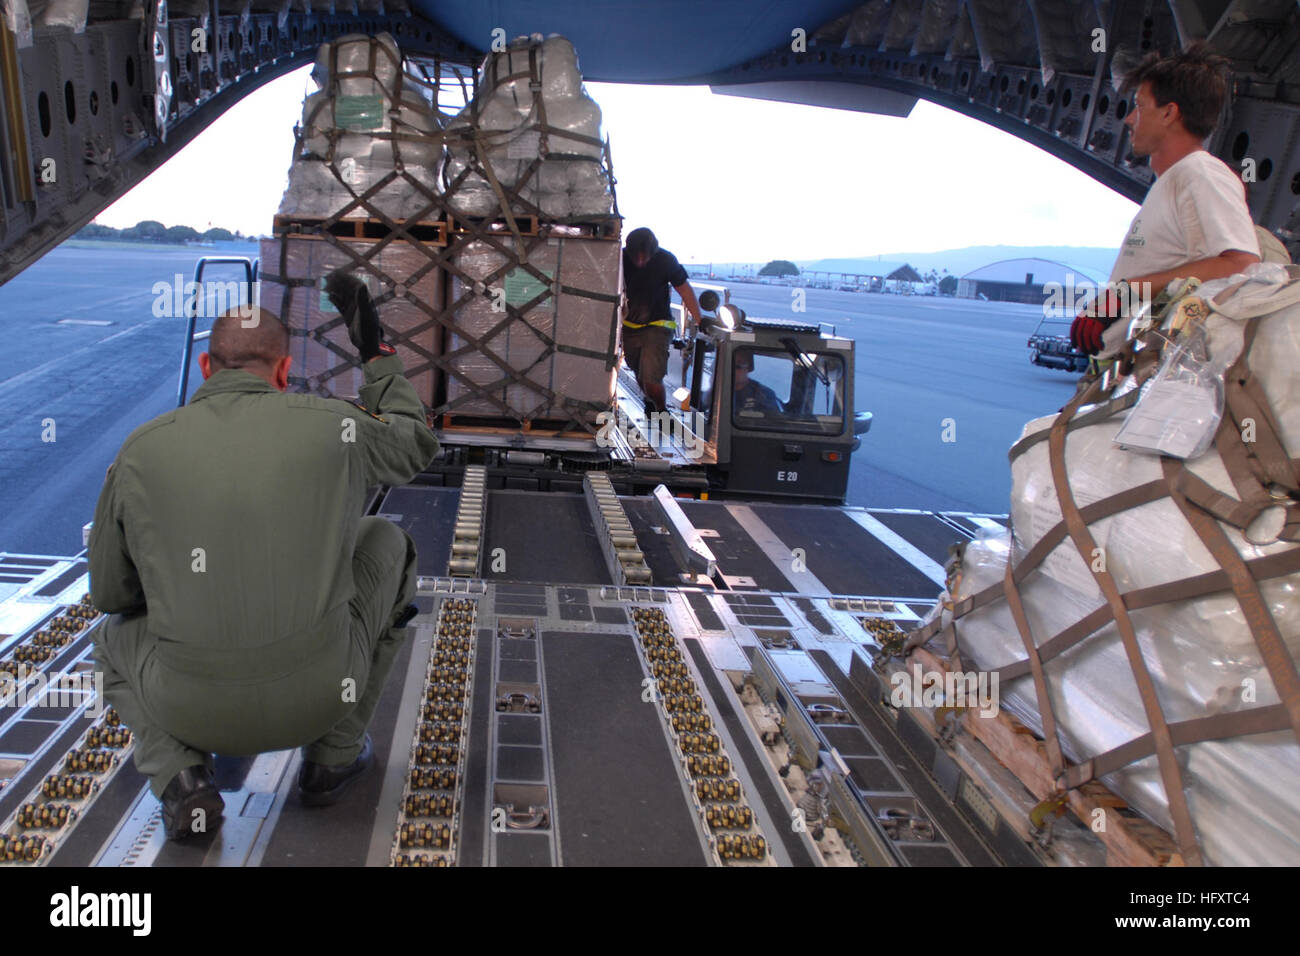 090930-F-9708M-072 HICKAM AIR FORCE BASE, Hawaii (Sept. 30, 2009) Tech. Sgt. Kimo McKee, assigned to the Hawaii Air National Guard, directs the loading of humanitarian supplies from the Federal Emergency Management Agency into a C-17 Globemaster III cargo aircraft. The supplies are for delivery to American Samoa to assist in relief efforts after a tsunami struck the island. The tsunami was triggered by an undersea earthquake Sept. 29.  (U.S. Air Force photo by Staff Sgt. Mike Meares/Released) US Navy 090930-F-9708M-072 Tech. Sgt. Kimo McKee, assigned to the Hawaii Air National Guard, directs t Stock Photo